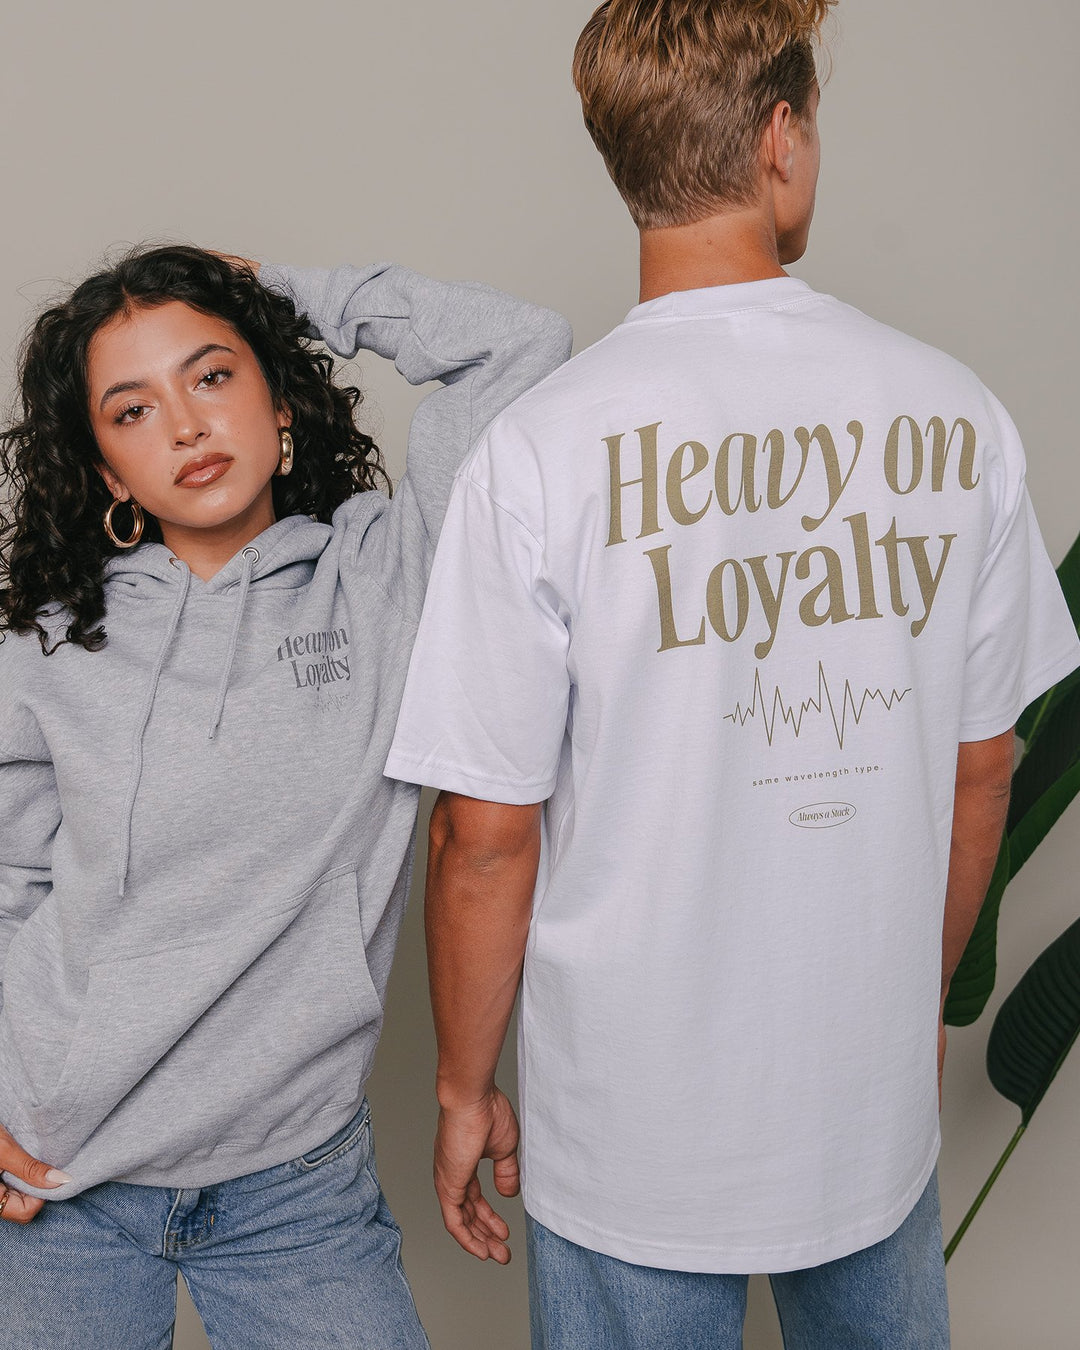 Heavy On Loyalty White Tee V2 - trainofthoughtcollective